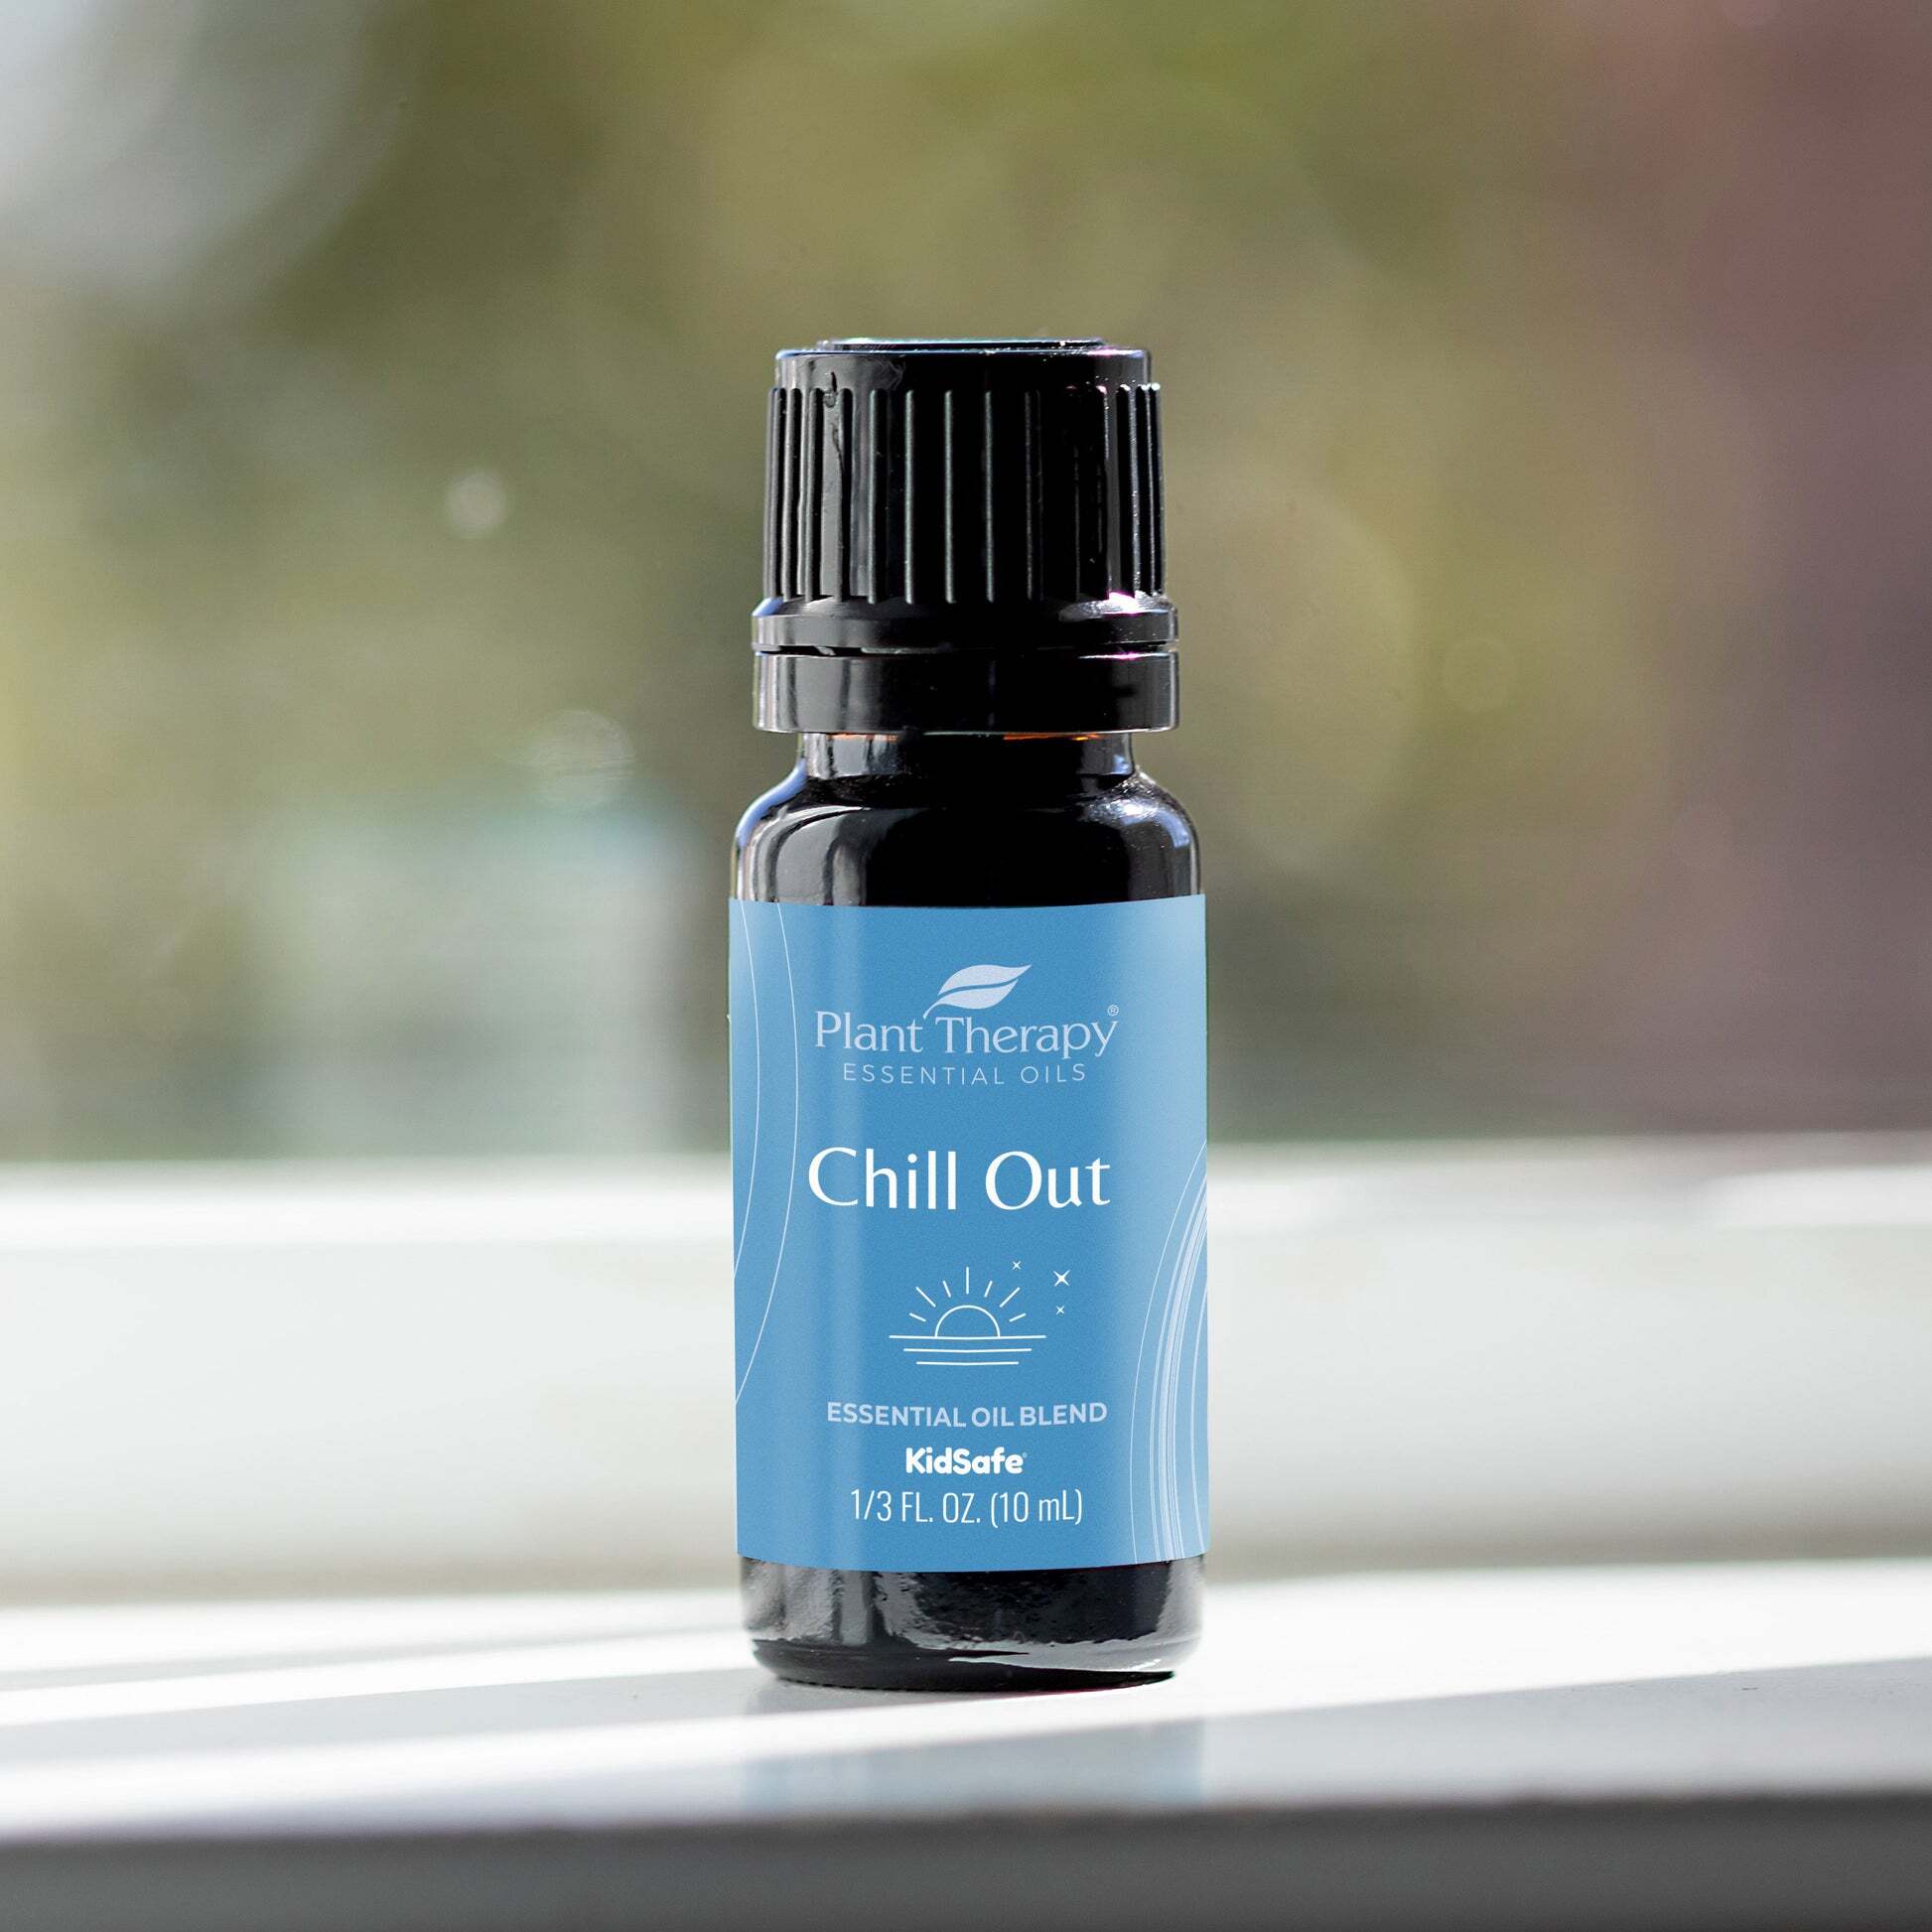 Chill_Out-eo-blend-10ml-03_1946x